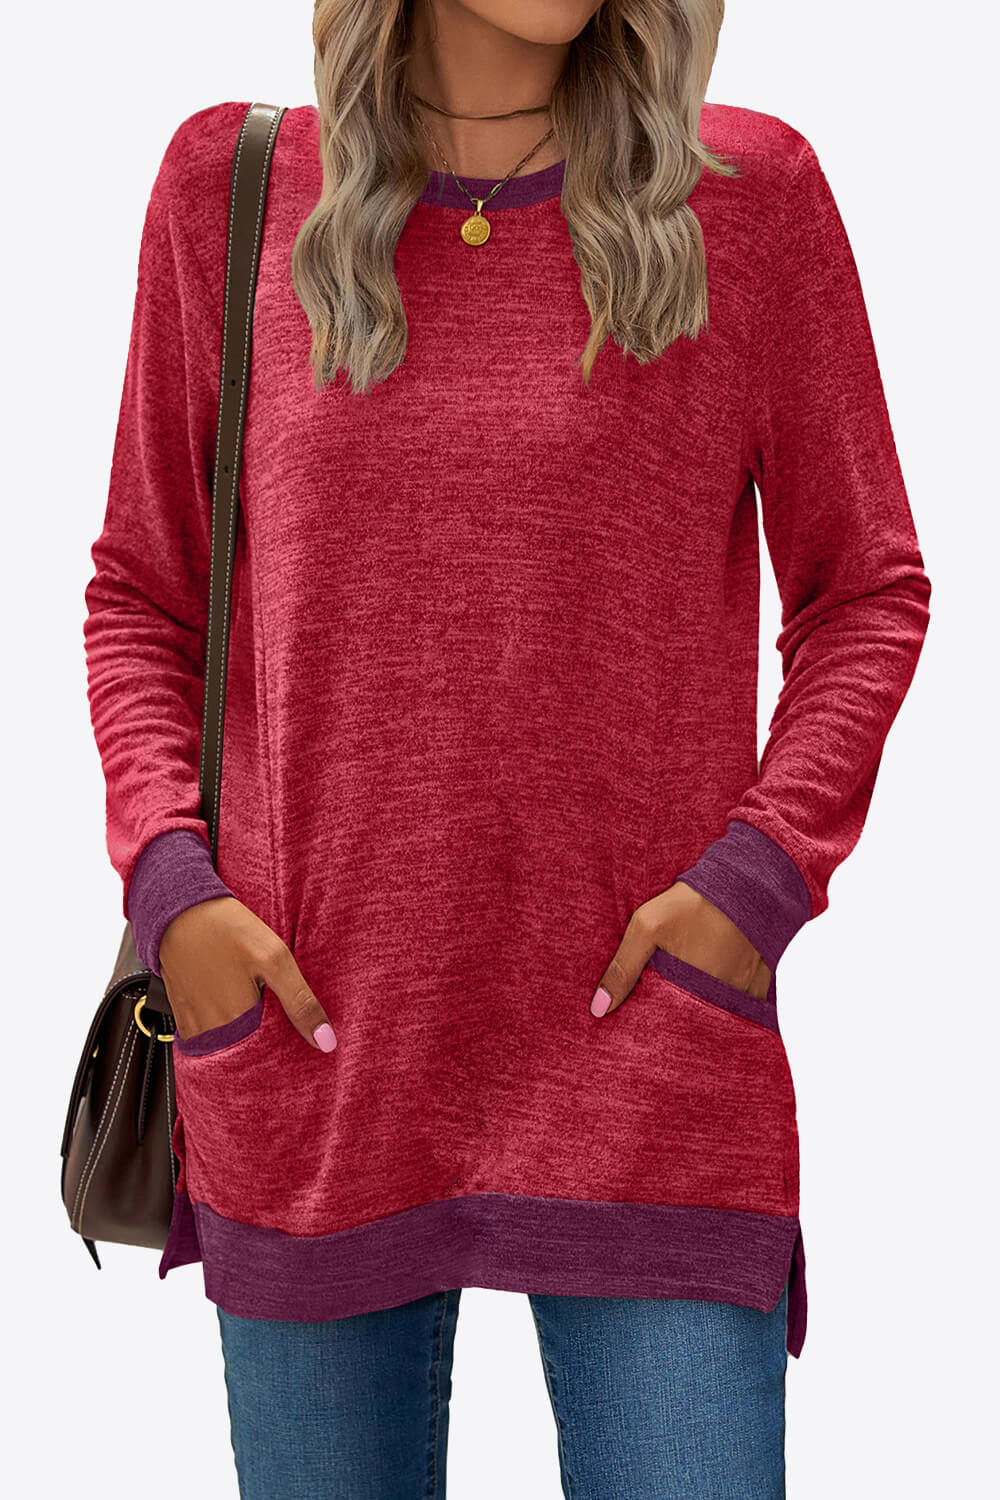 Heathered Slit Top with Pockets - Red / S - T-Shirts - Shirts & Tops - 19 - 2024